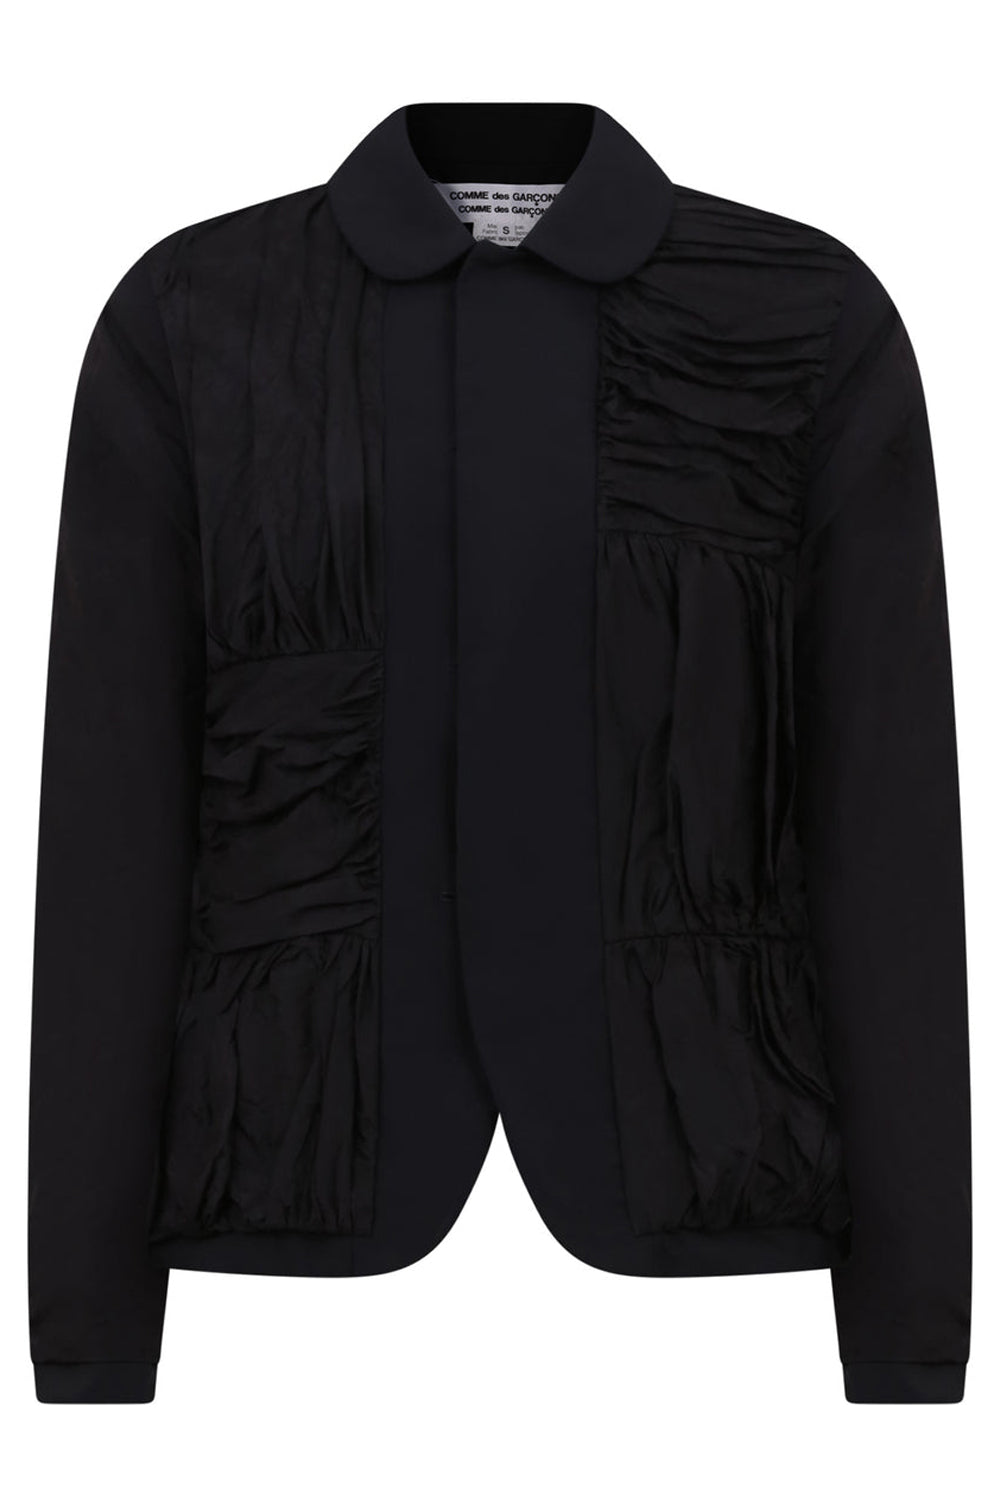 COMME DES GARCONS RTW REVERSIBLE JACKET WITH TAFFETA SLEEVES |  BLACK